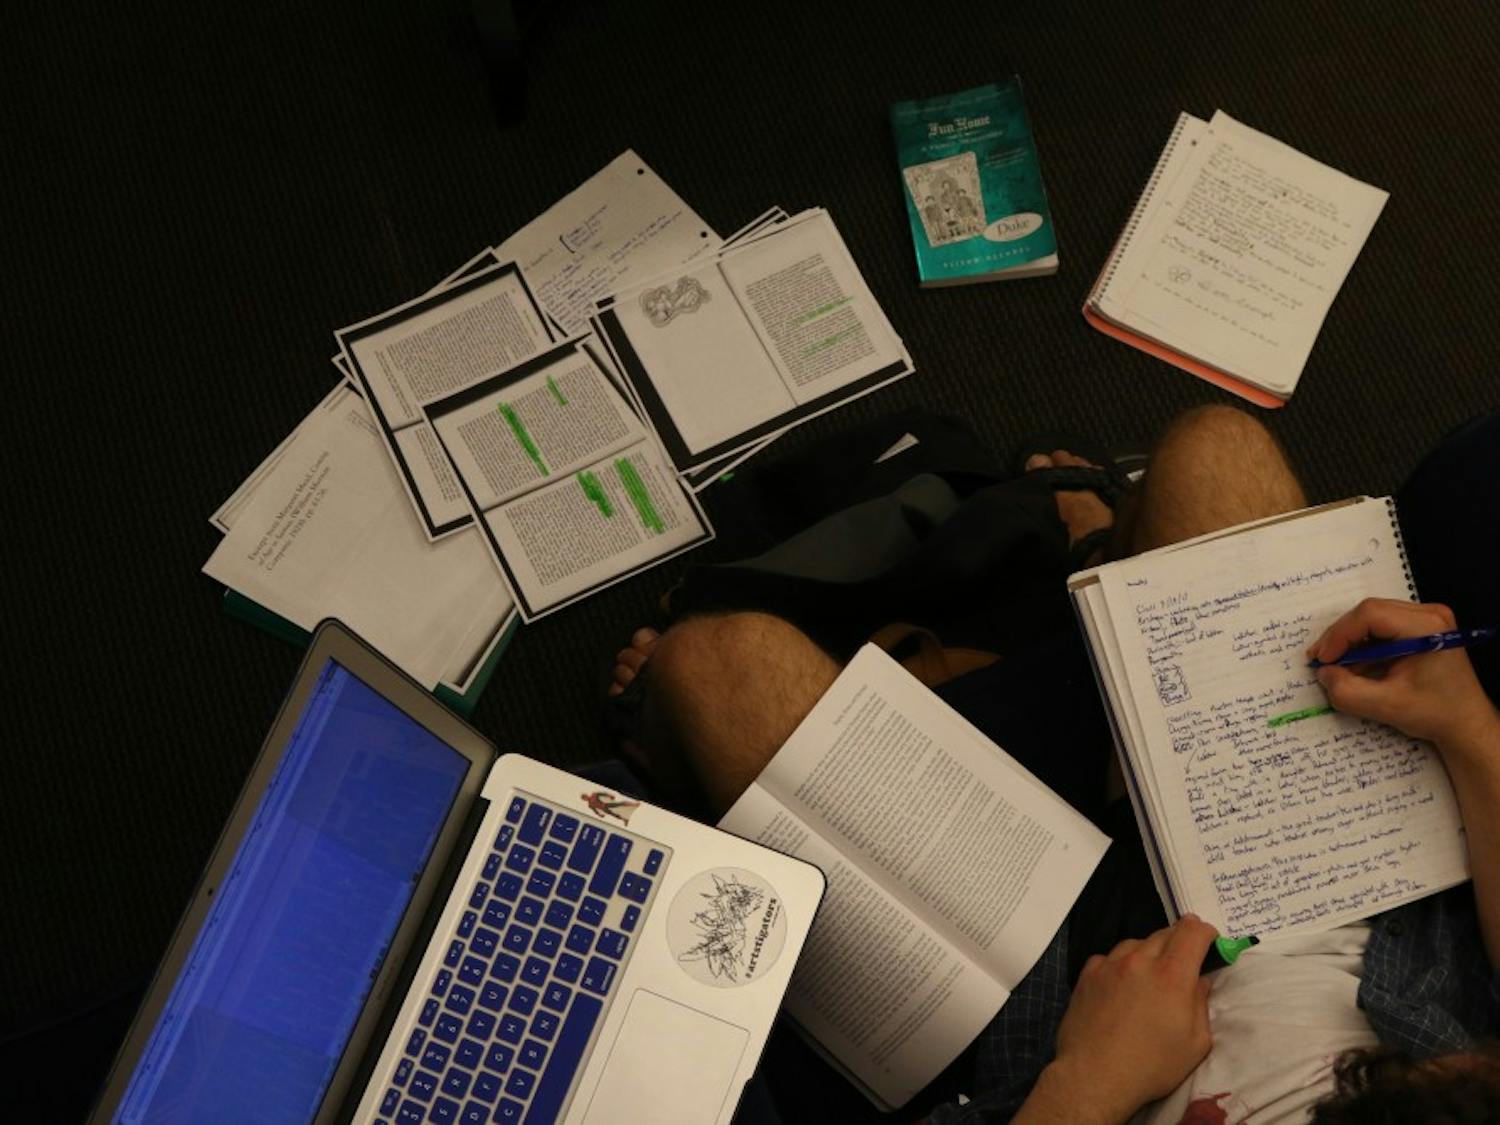 First-year Amory Williams' work space was the epitome of a study sprawl Tuesday night.